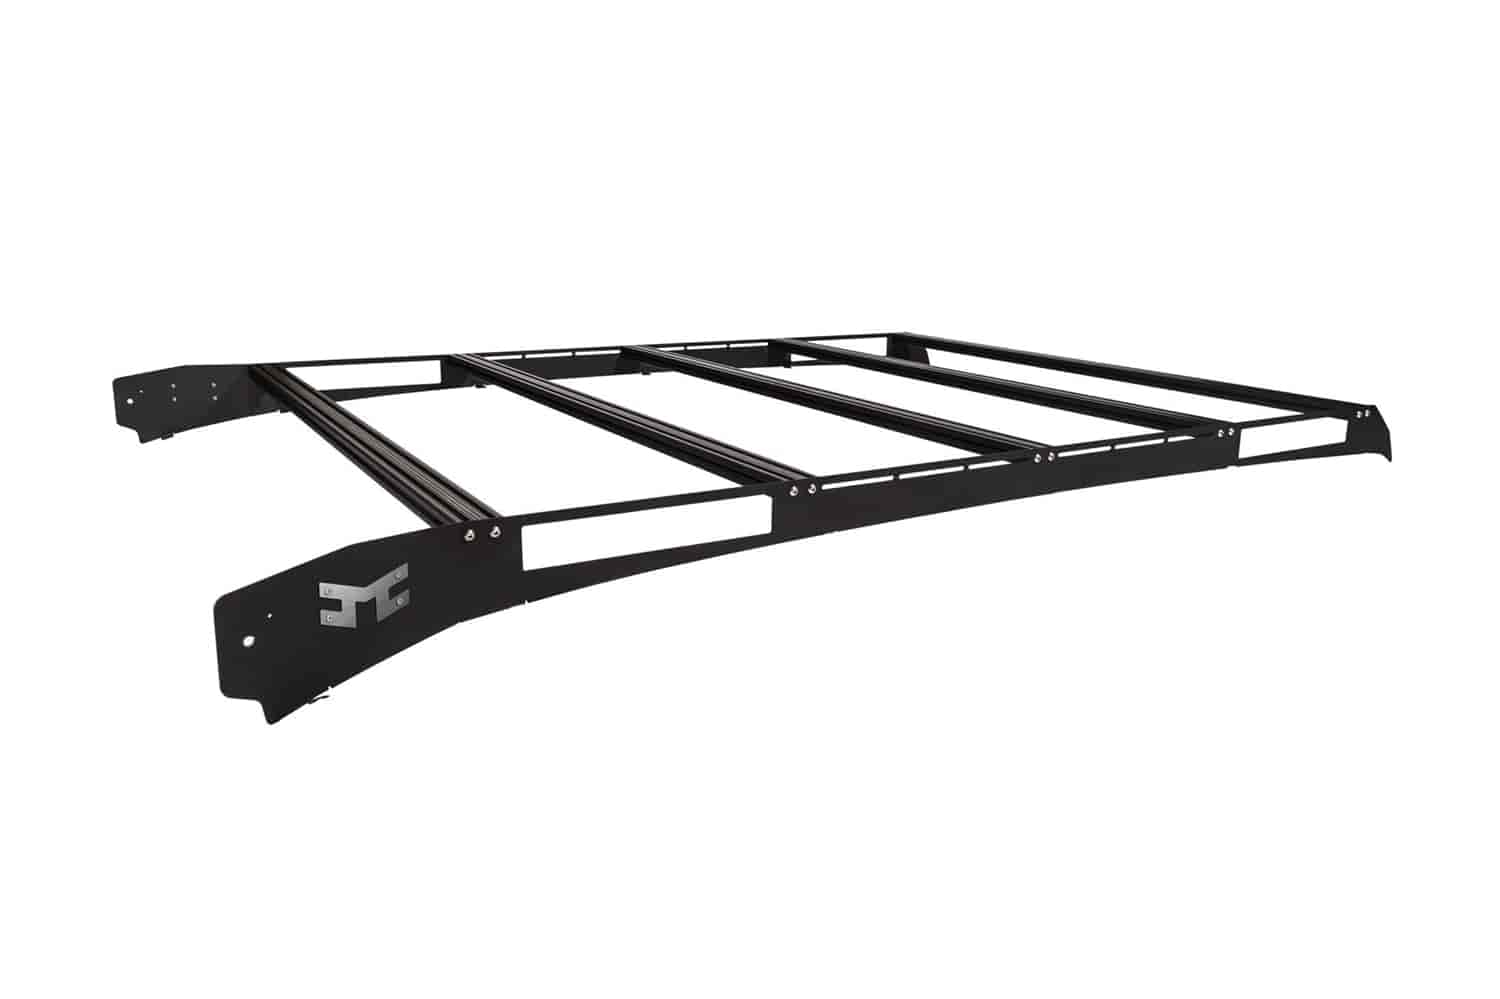 Performance Roof Rack for 1999-2016 Ford F-250/350/450 SuperDuty Crew Cab Trucks